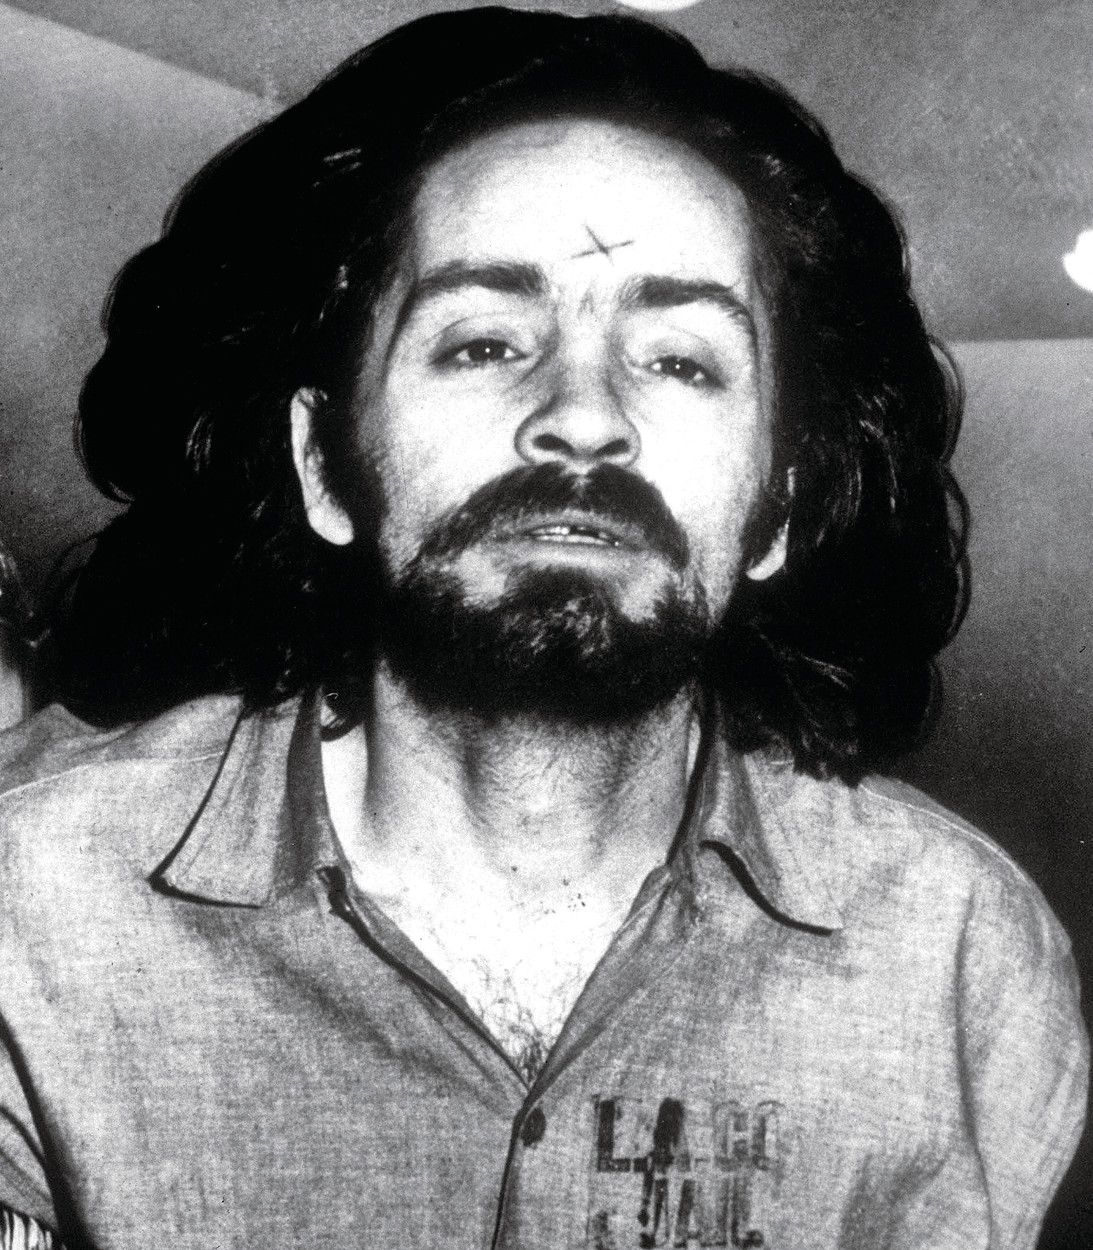 Notorious cult leader Charles Manson